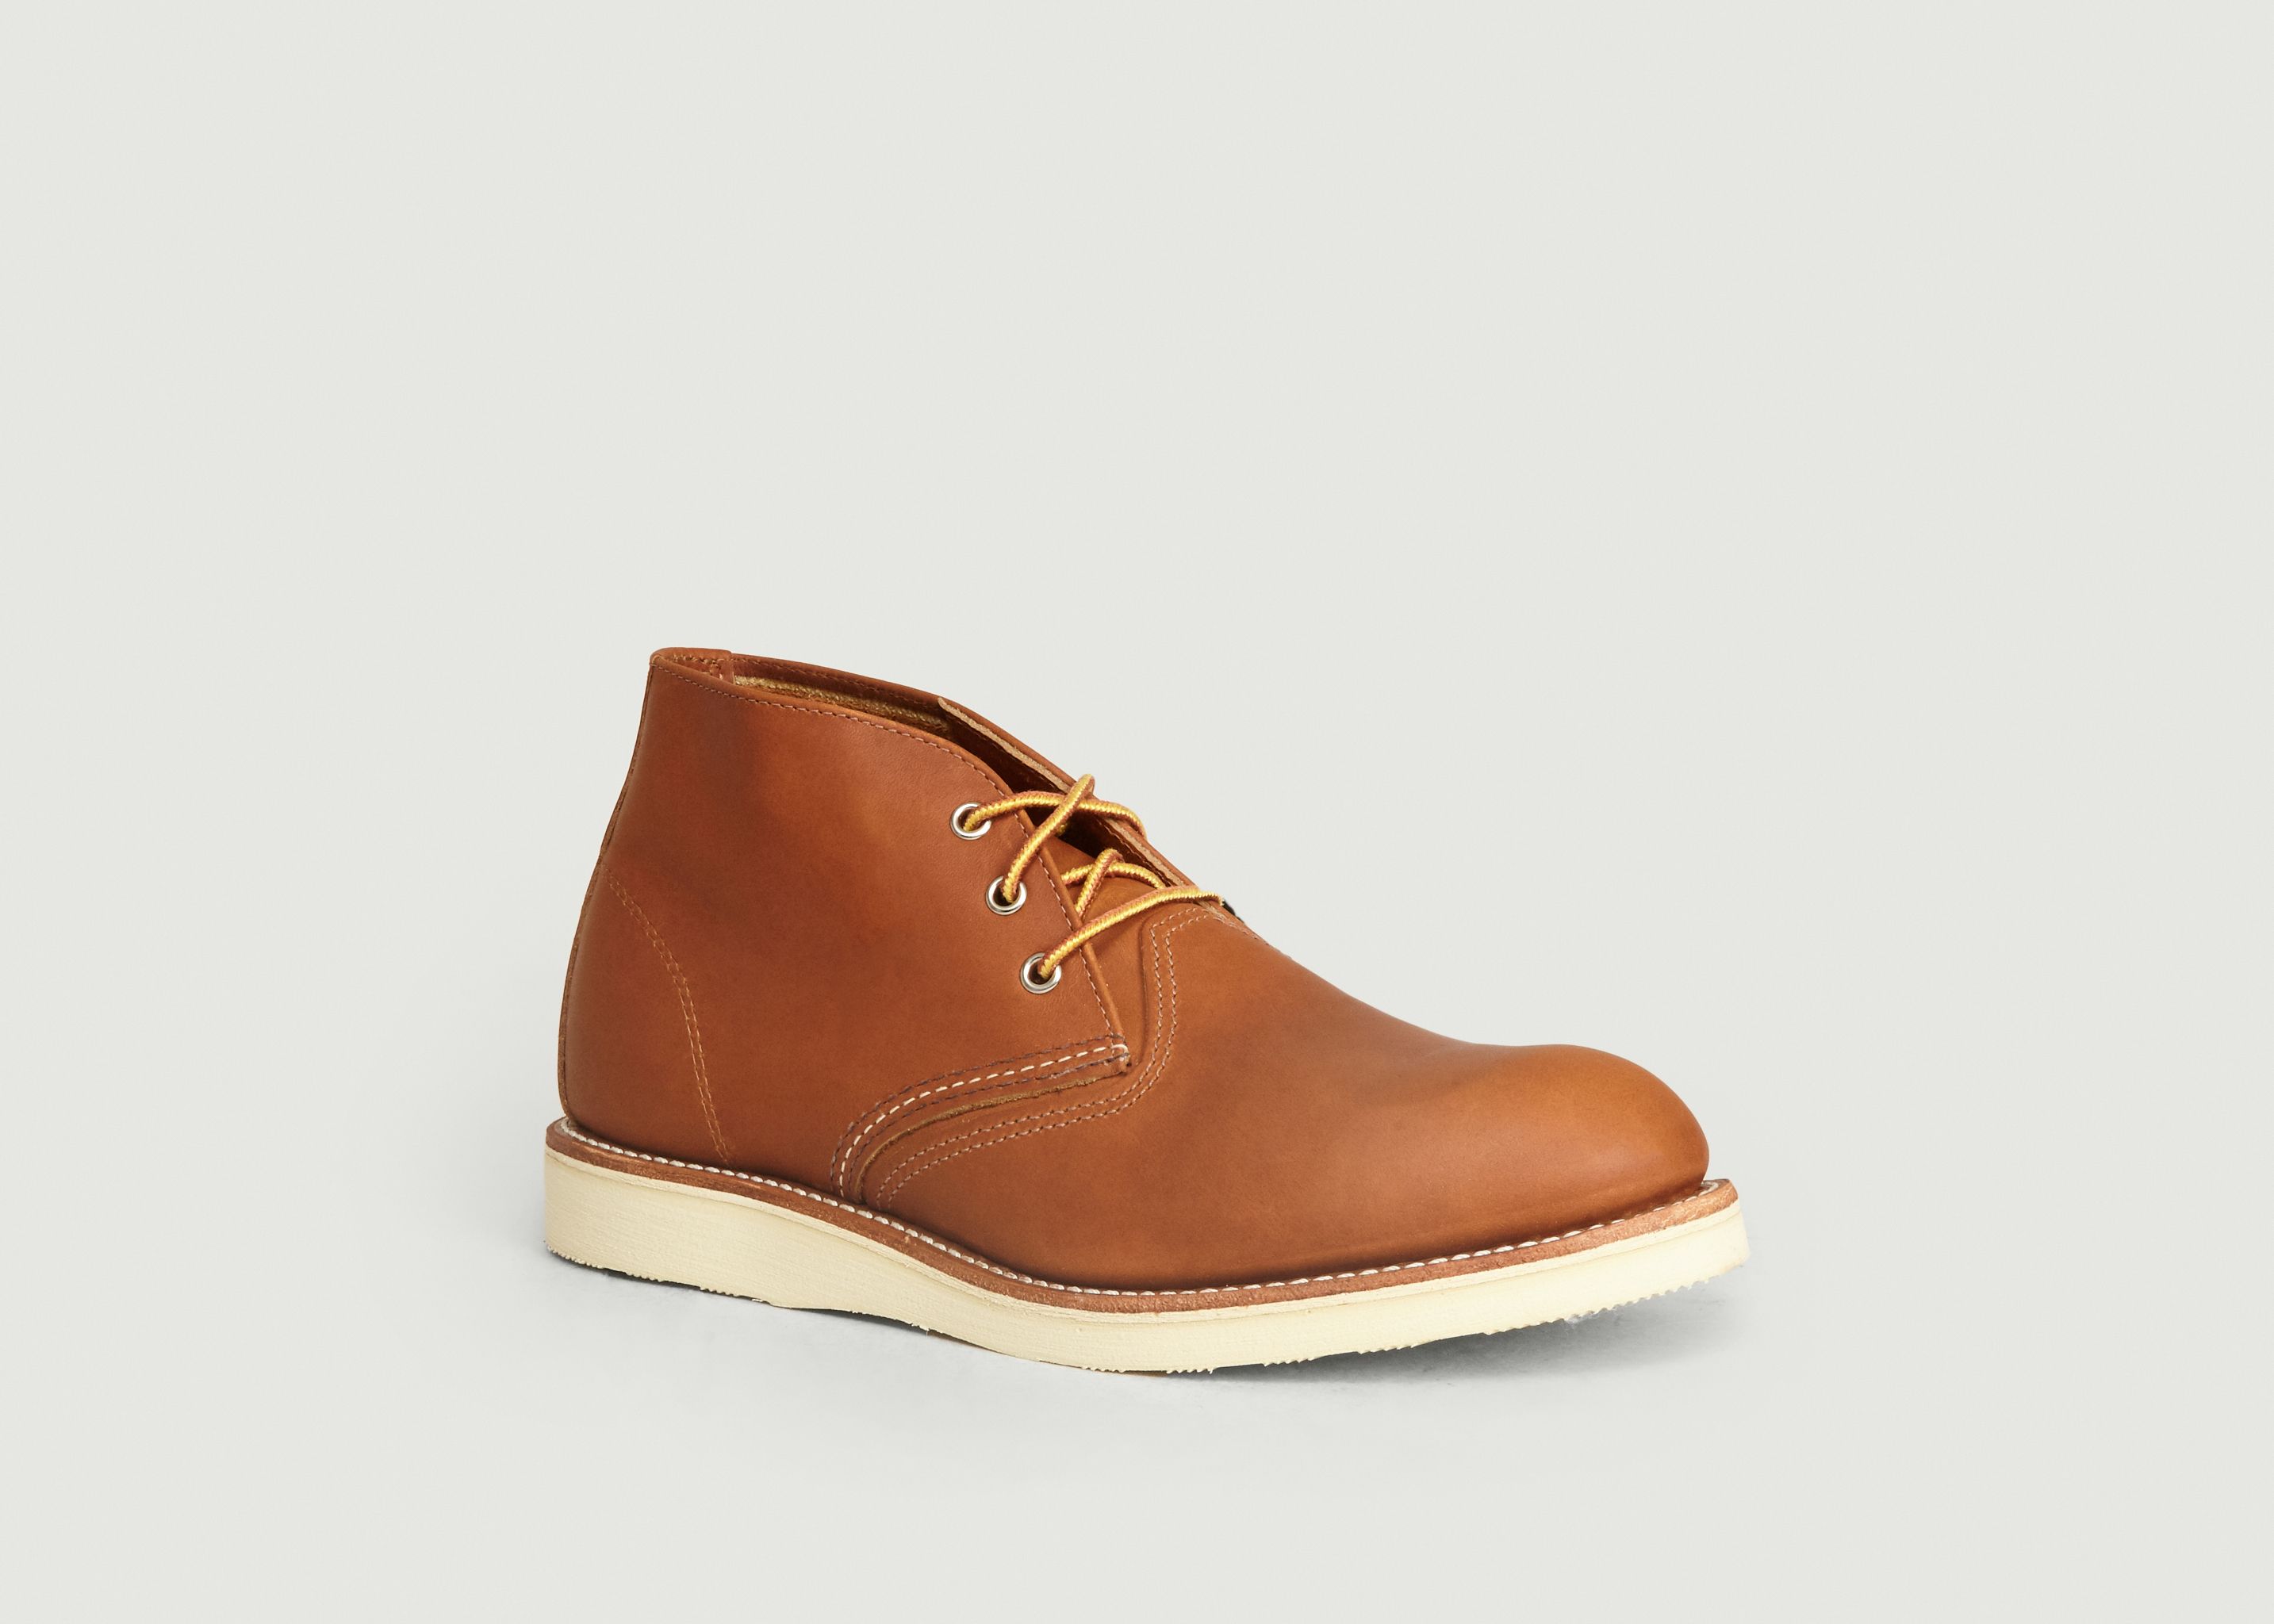 Boots Work Chukka Oro-iginal Camel - Red Wing Shoes